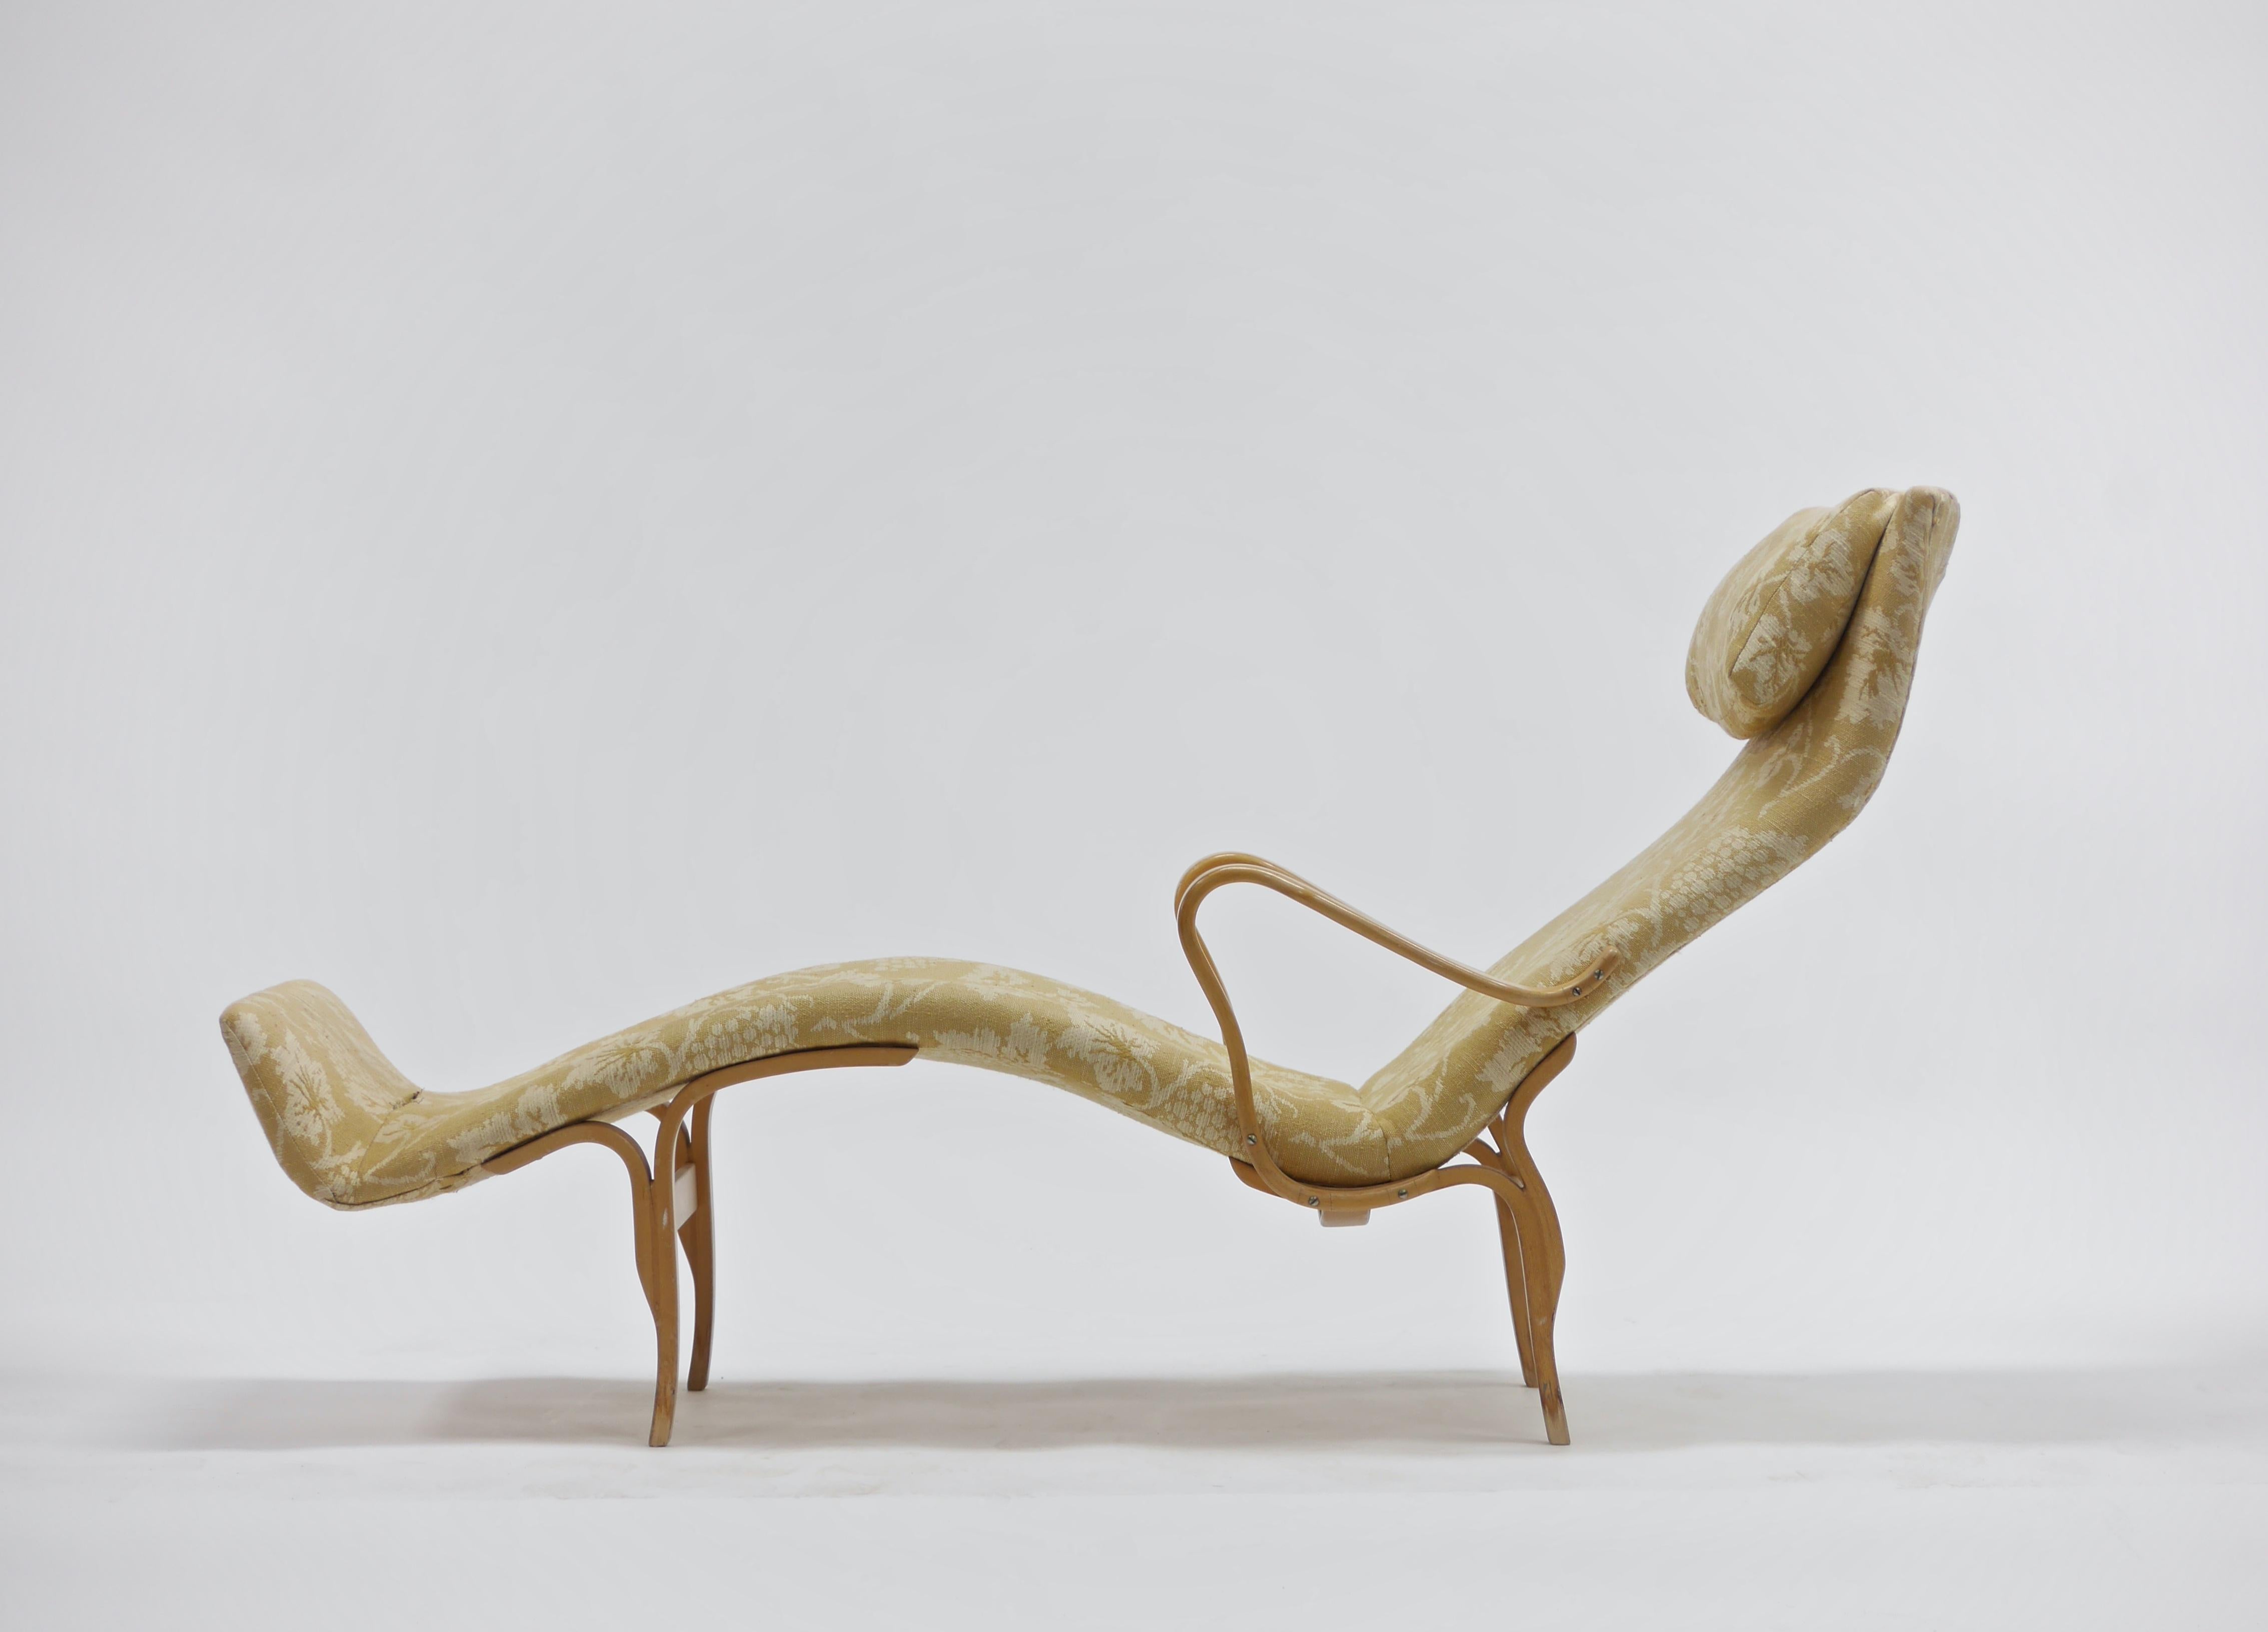 Pair of Pernilla chaise lounges by Bruno Mathsson. Unusual upholstered version with arms. Original vintage condition.